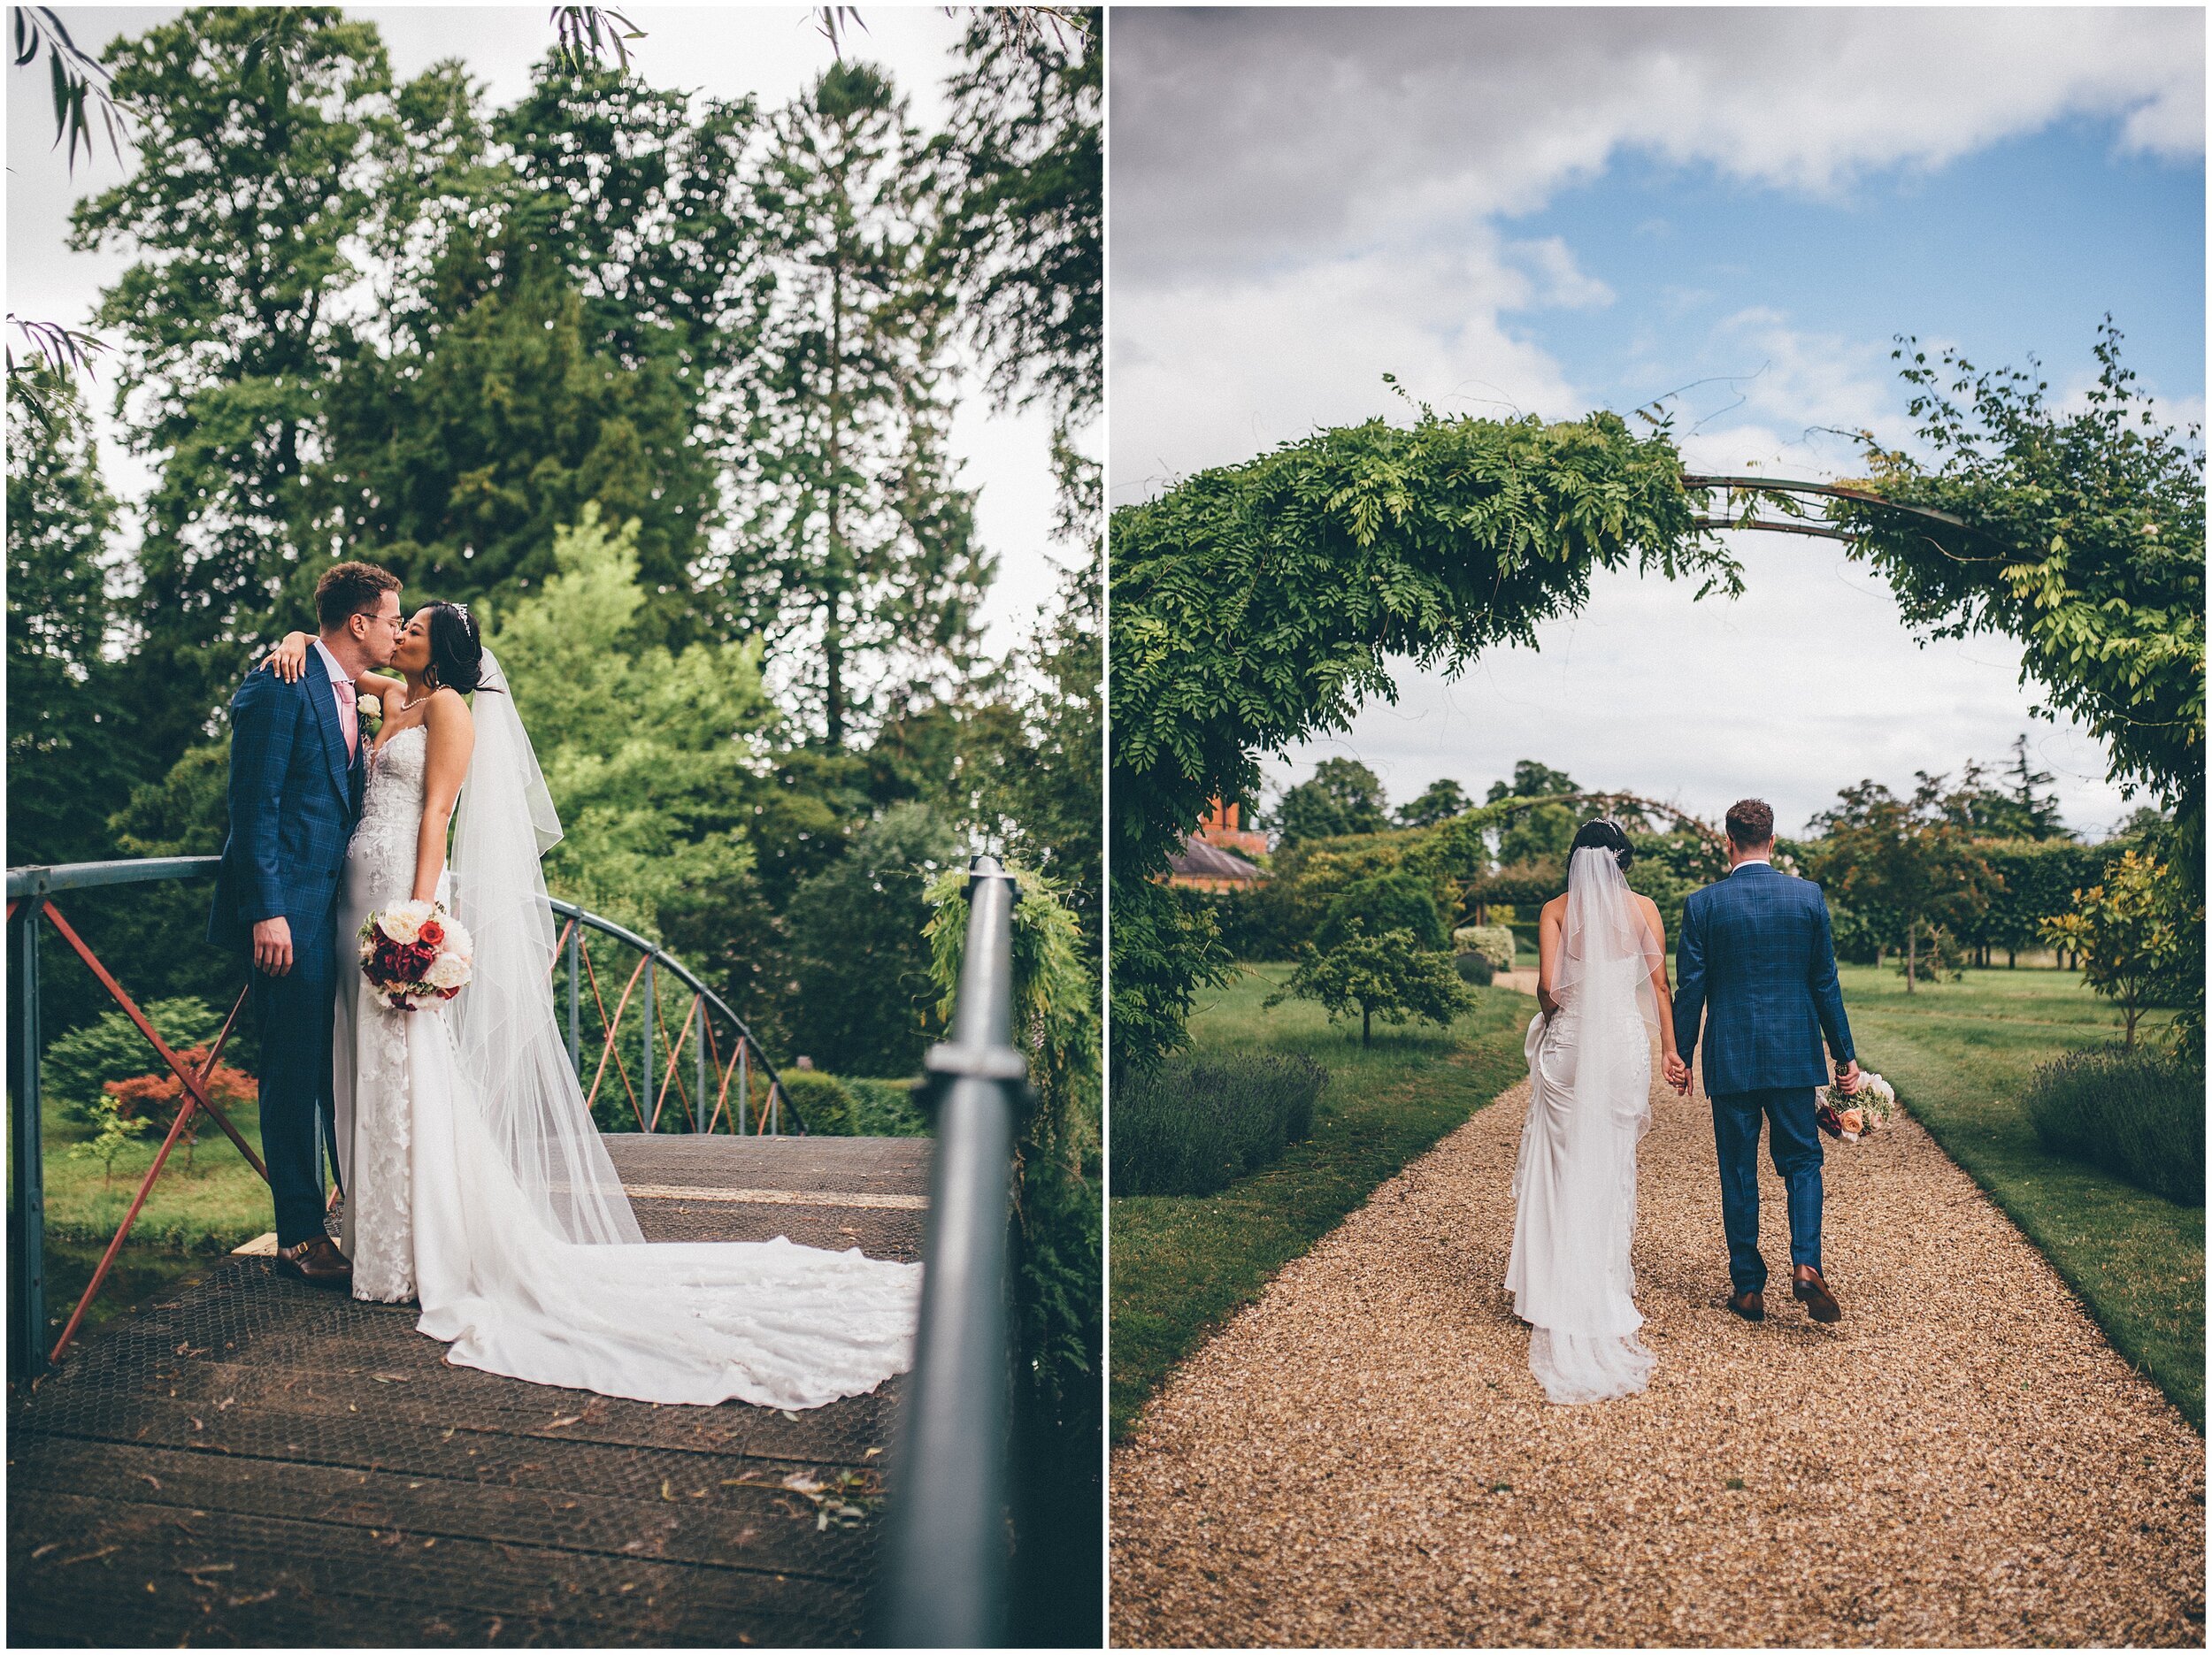 Bride and groom have romantic photographs taken by Cheshire wedding photographer.